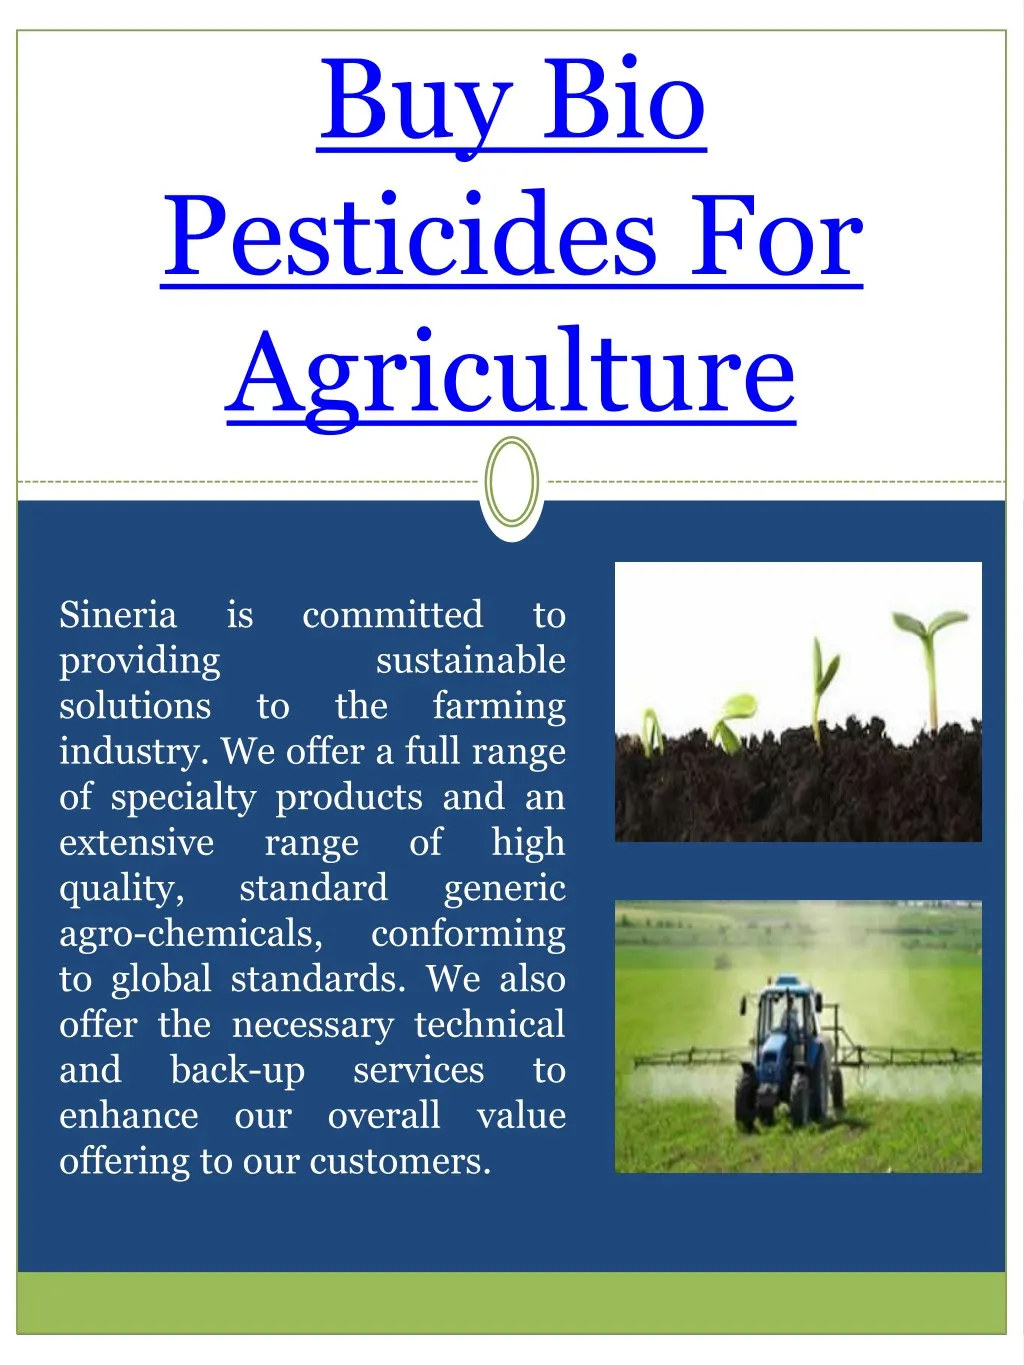 buy bio pesticides for agriculture